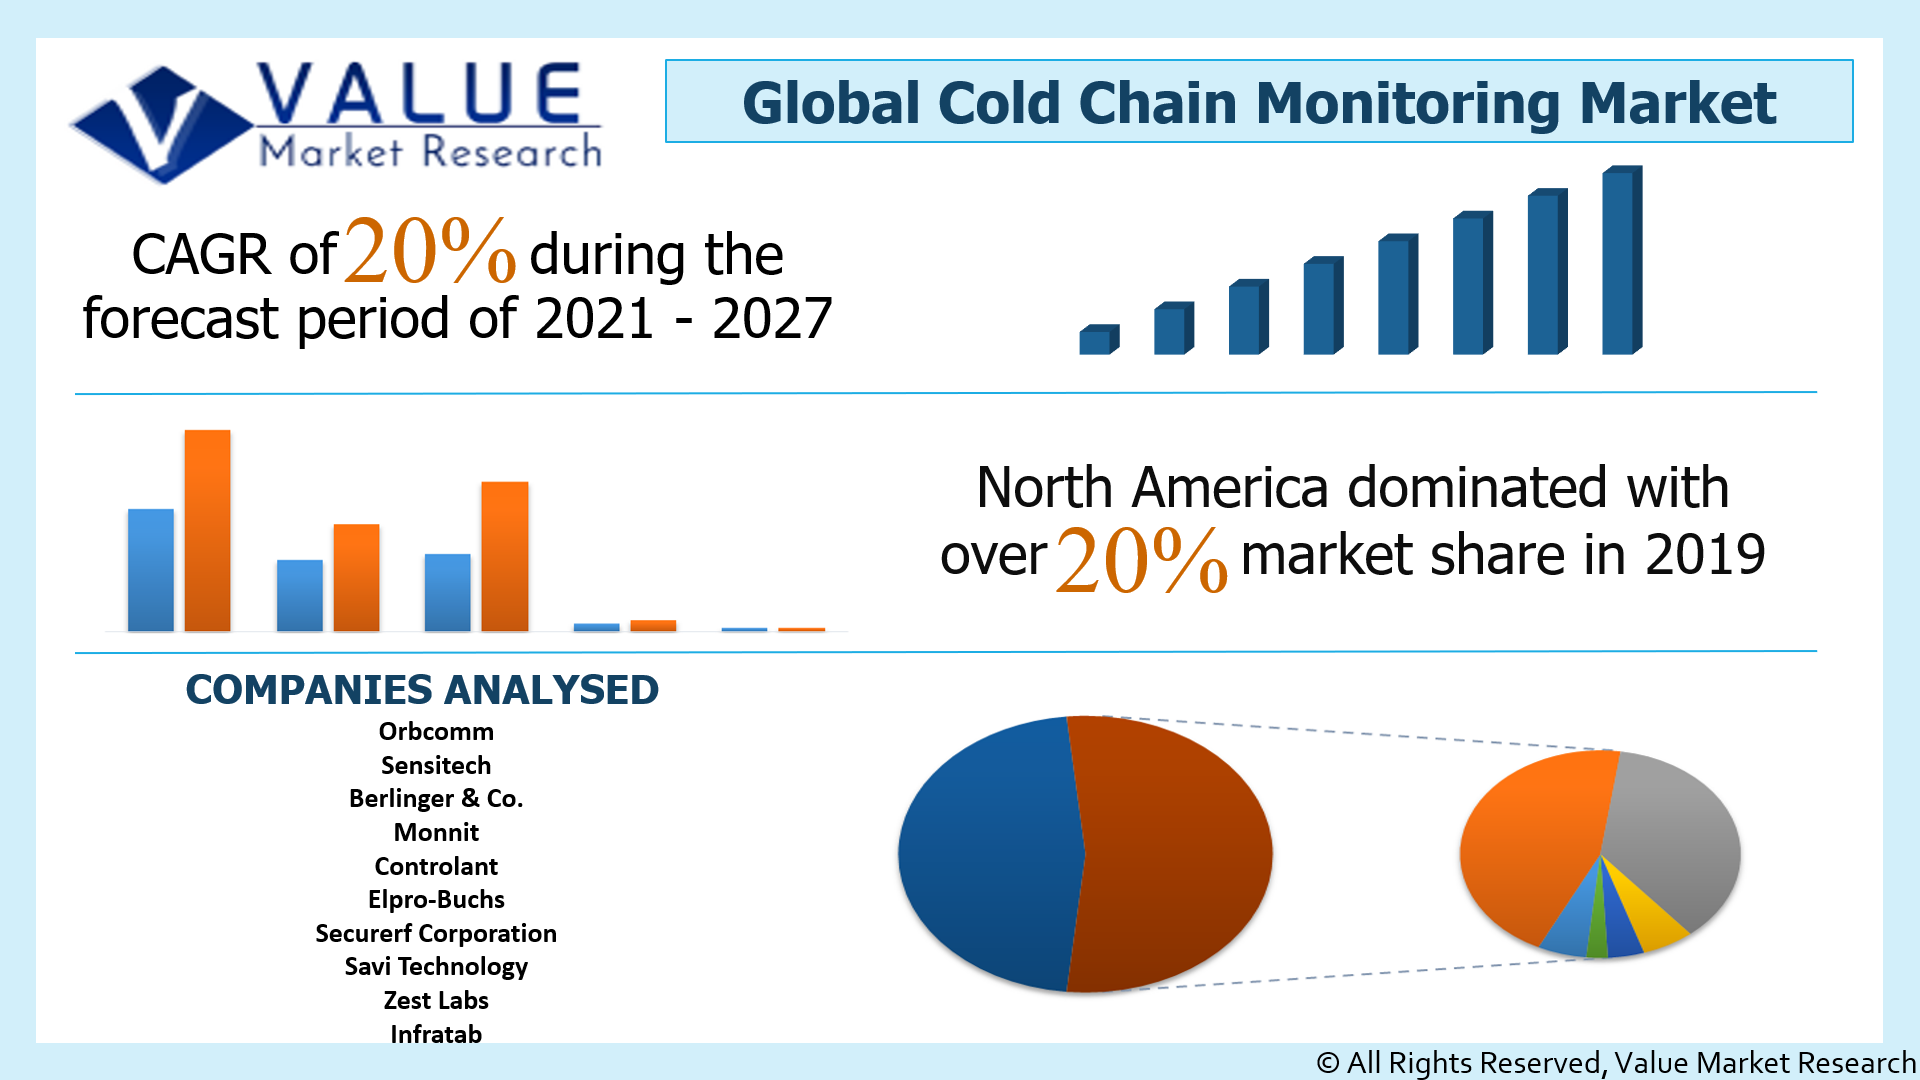 Global Cold Chain Monitoring Market Share